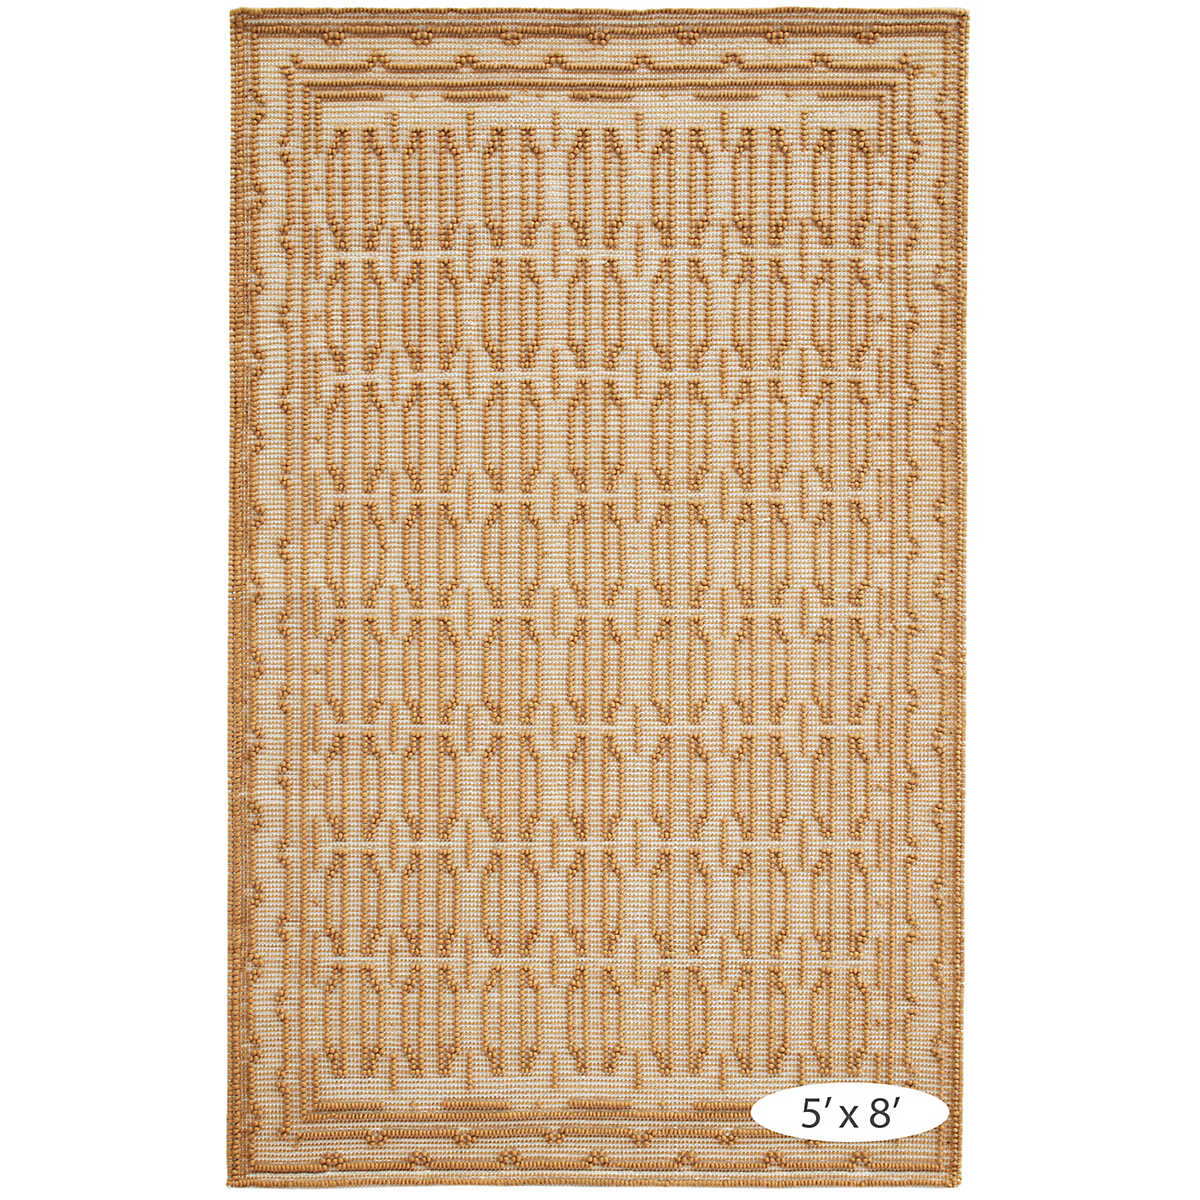 The Campbell Sand Rug relief pattern plays across a gently marled woven wool ground, accentuating the graphic dimension created by the different weaves. The central motif is repeated inversely to create a border around this sumptuous rug. Amethyst Home provides interior design services, furniture, rugs, and lighting in the Des Moines metro area.